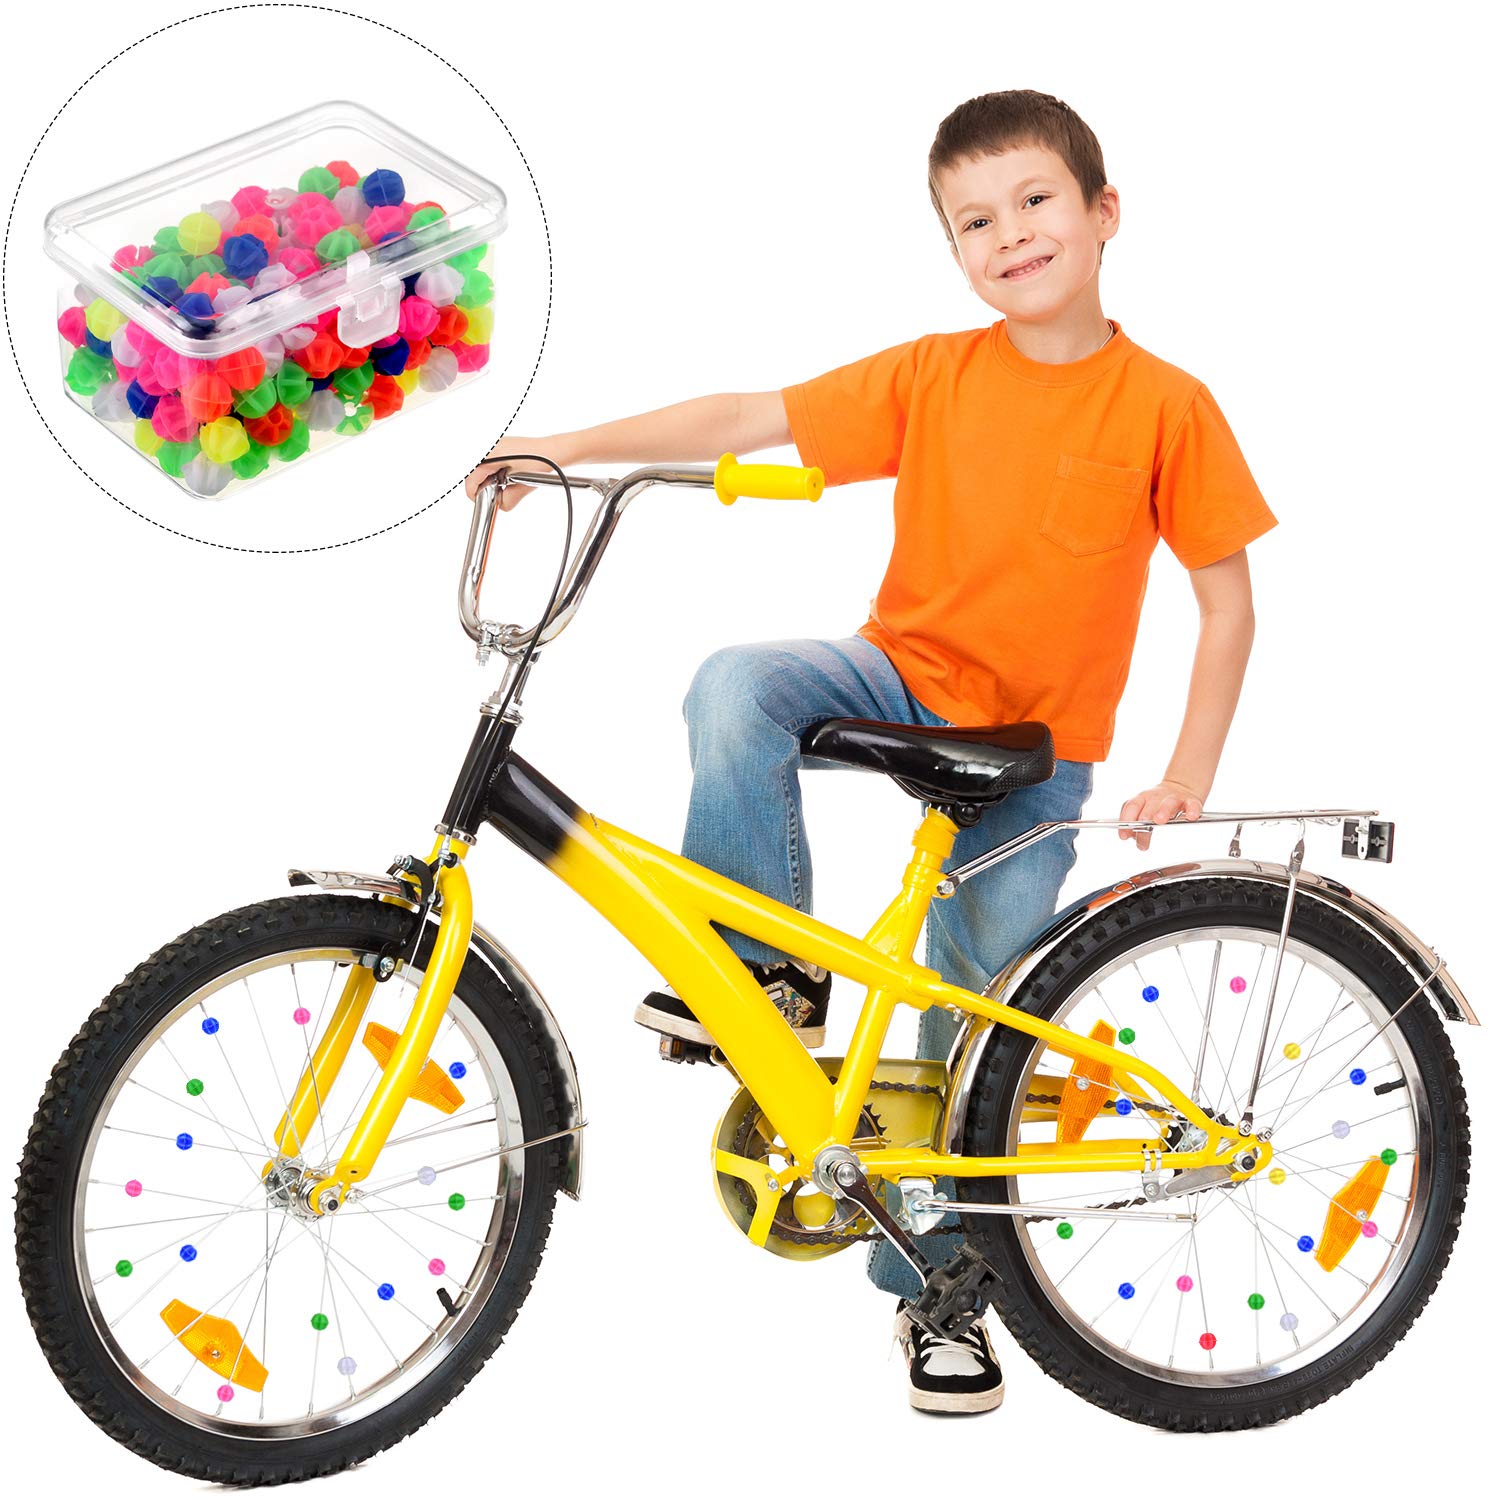 Gejoy 216 Pieces Bicycle Spoke Beads Bicycle Wheel Spokes Beads Assorted Color Plastic Clip Beads Spoke Decoration with Plastic Storage Box